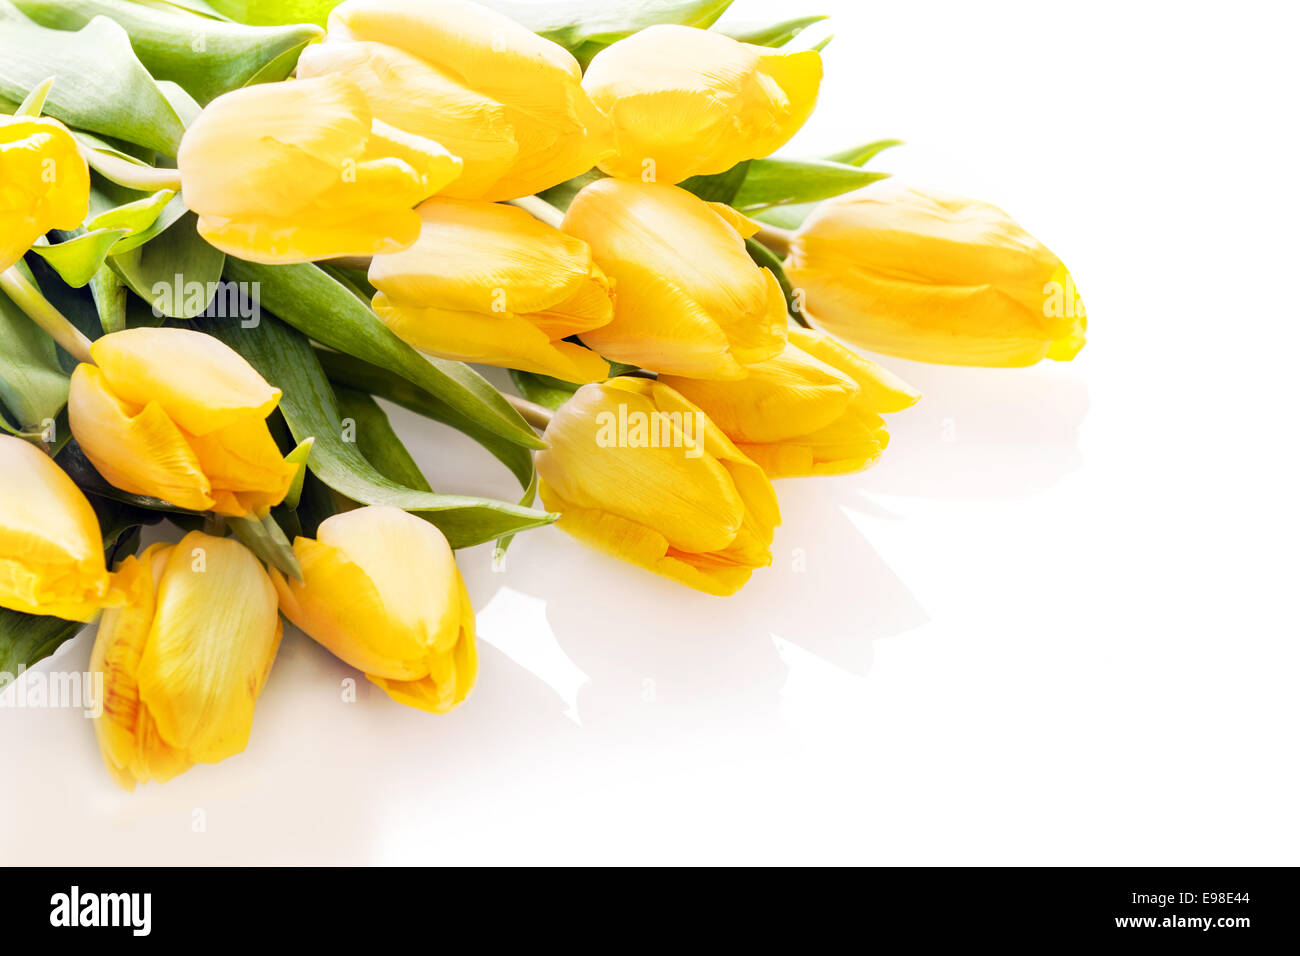 Bouquet of vibrant yellow fresh tulips lying on a white background with copyspace for your anniversary or birthday wishes Stock Photo